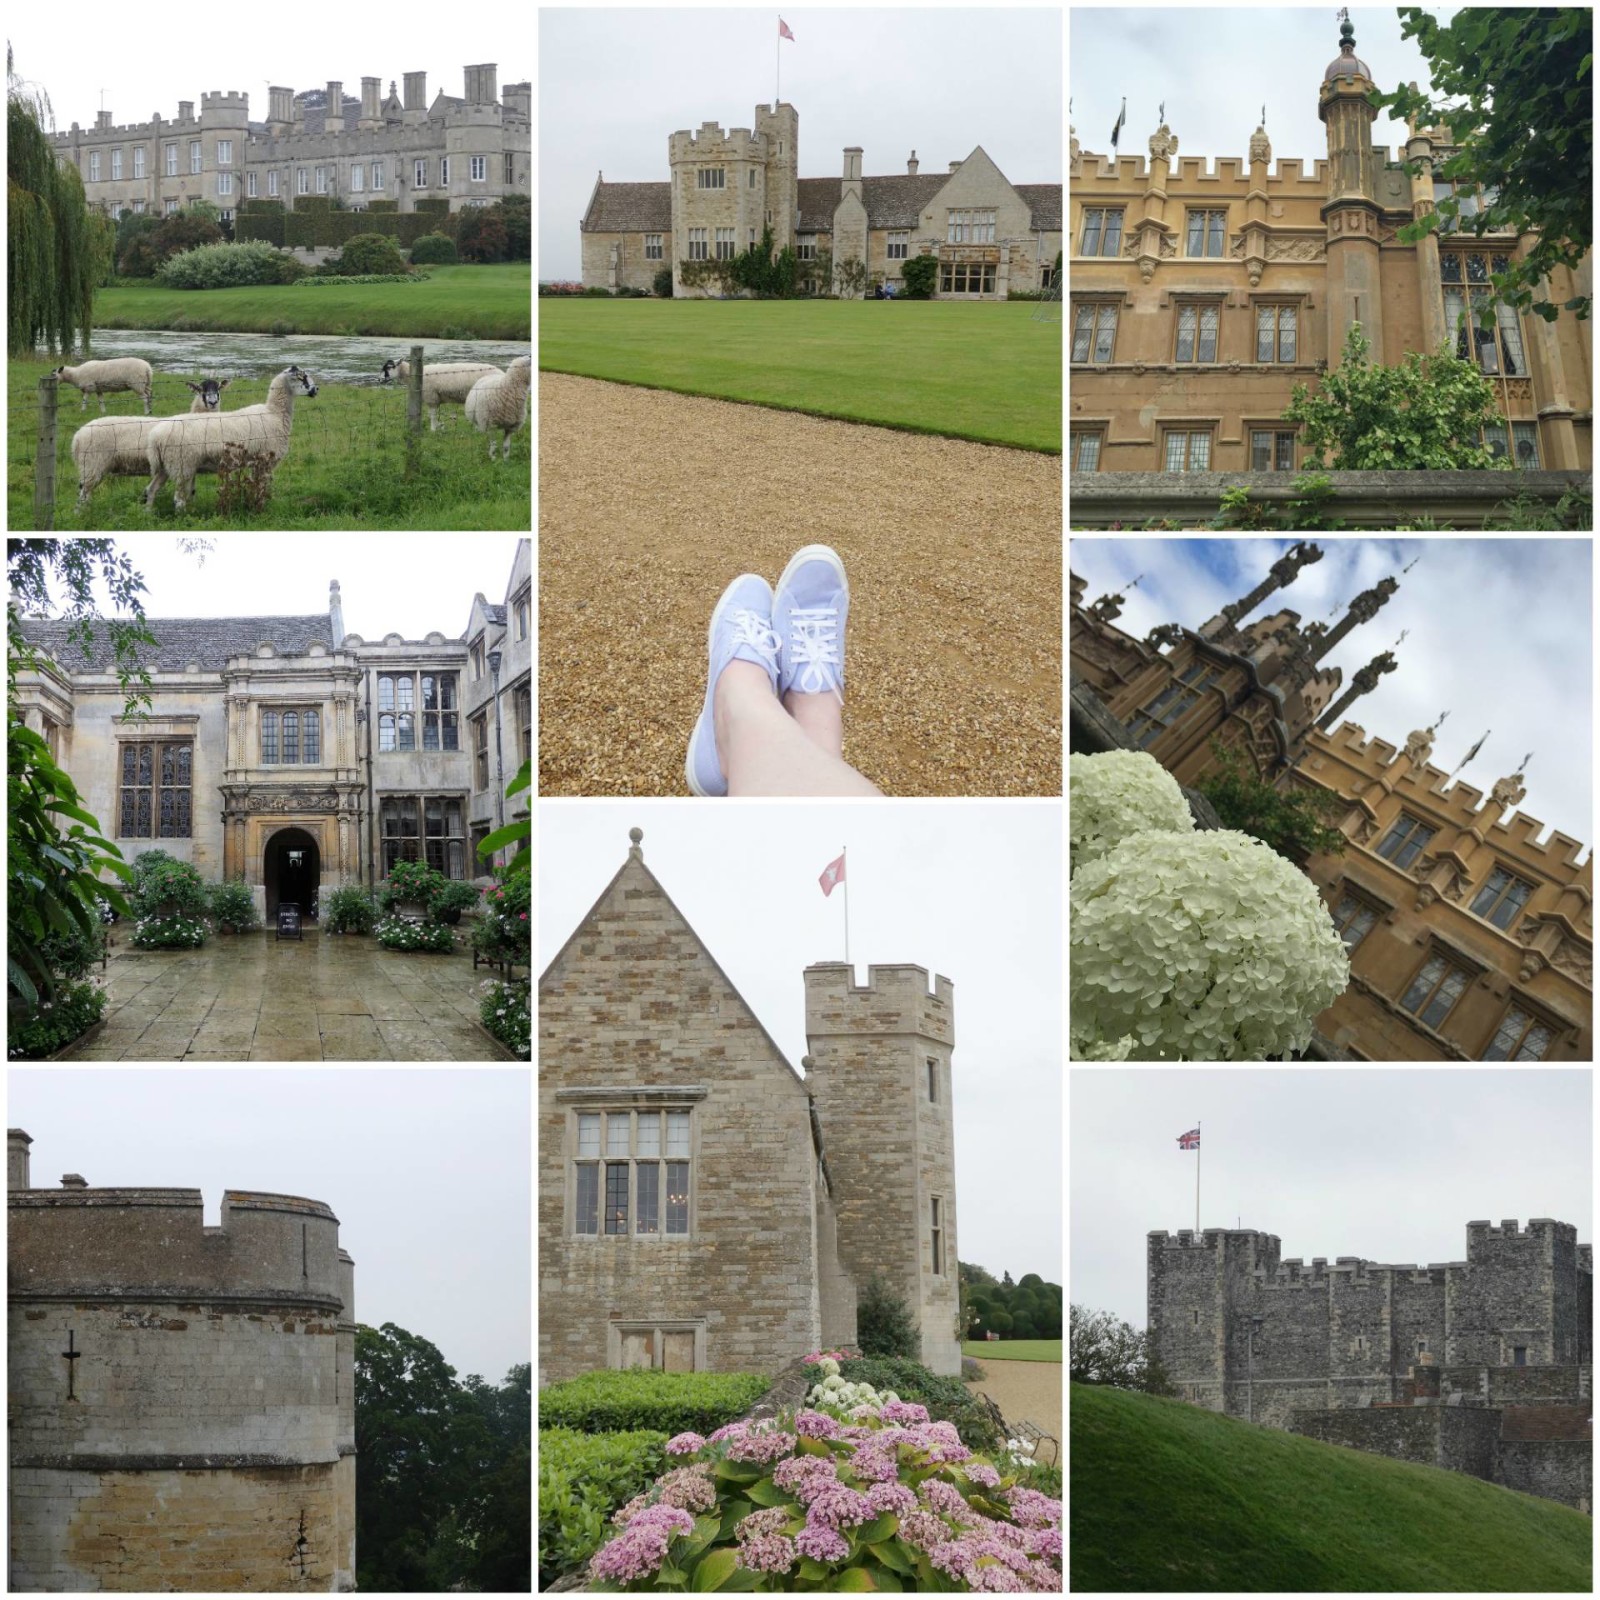 Where-Did-the-Wind-Blow-Me-and-a-few-other-reflections-My-2015-Review-Castles-England